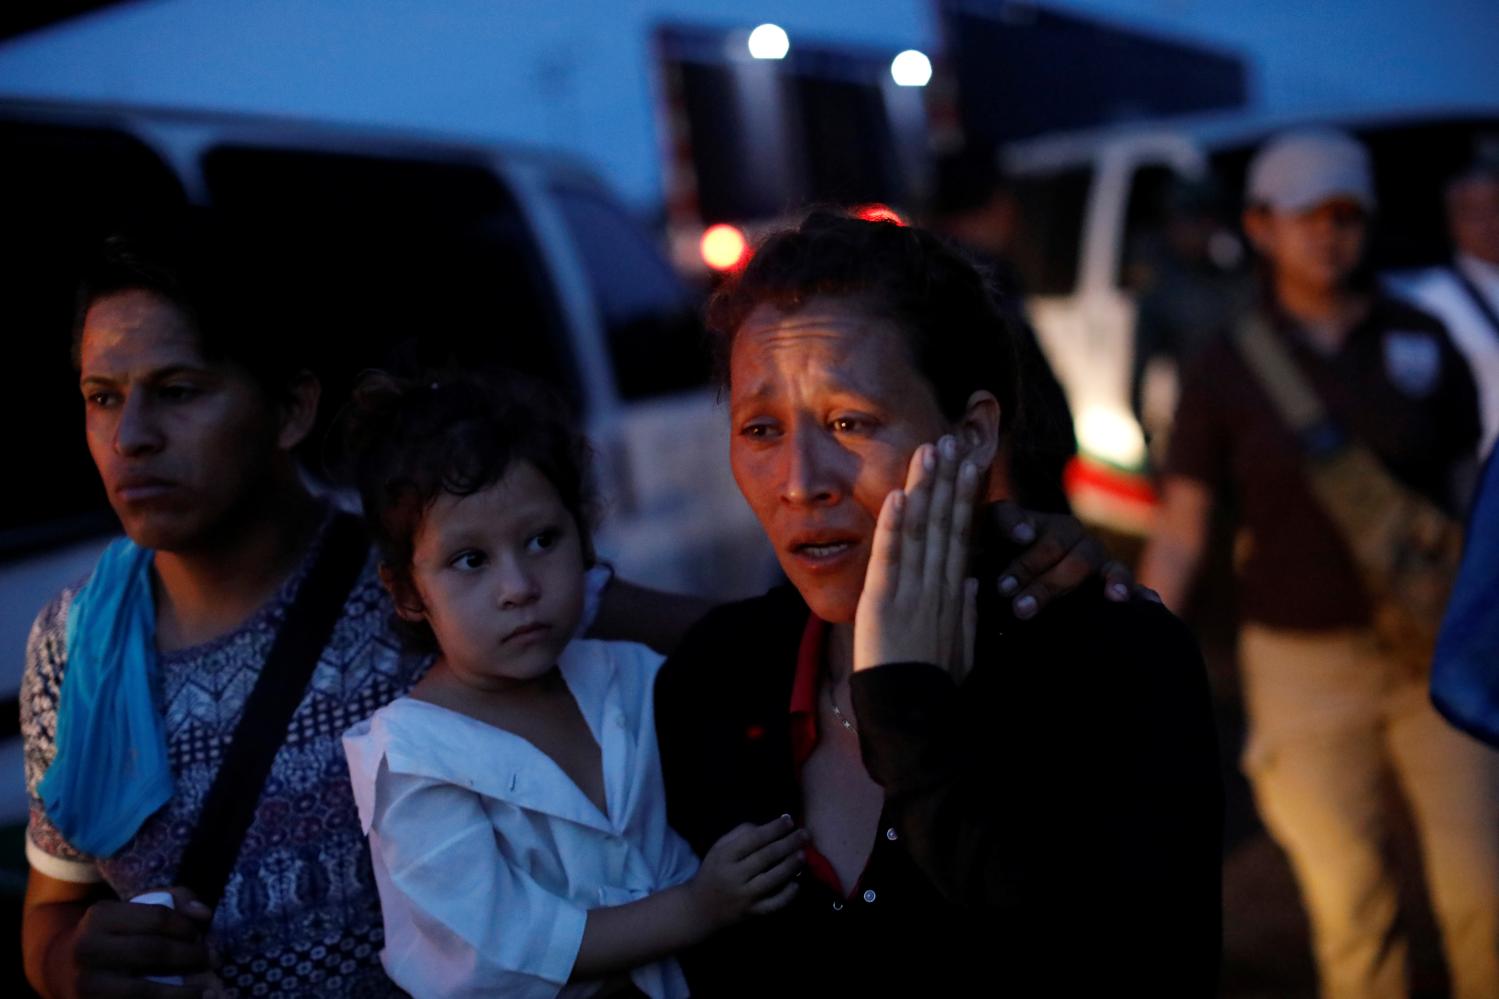 A woman, part of a convoy of Central American migrants, is escorted into a van by National Institute of Migration (INM) officers, after being detained at a checkpoint on the outskirts of Tapachula, Mexico, May 19, 2019. REUTERS/Andres Martinez Casares - RC1F10AAEE00